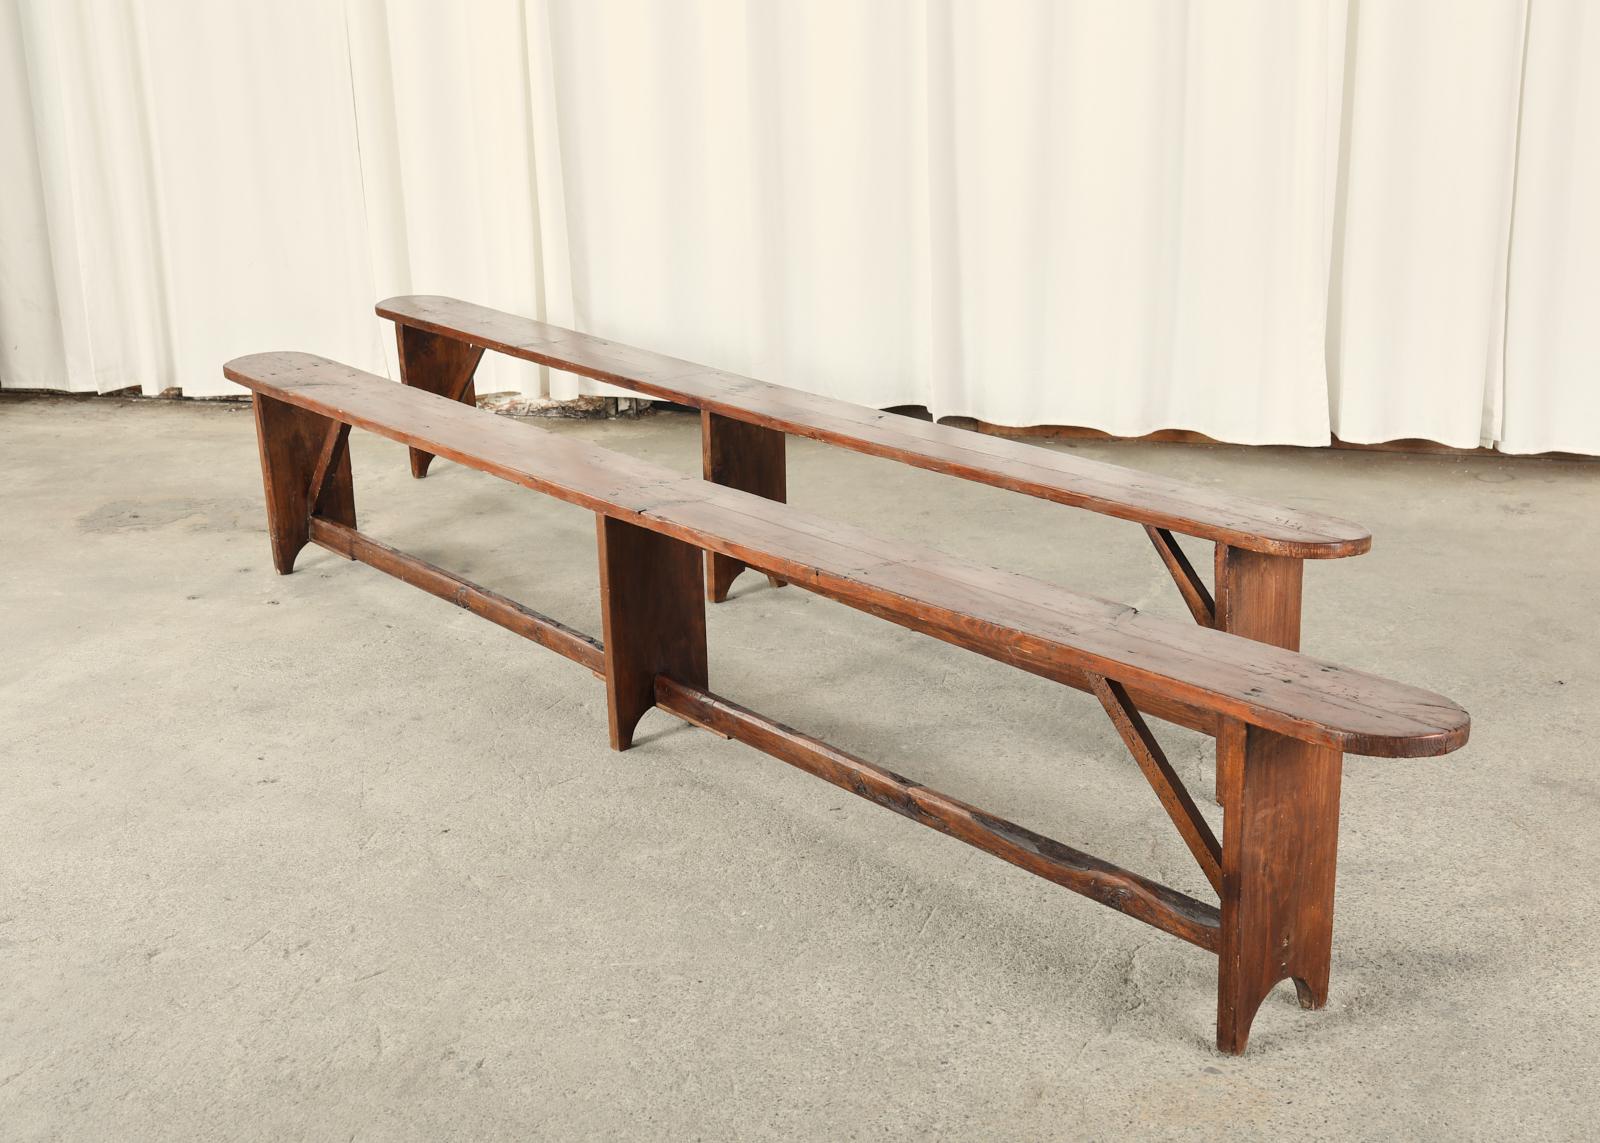 Monumental pair of 19th century country French provincial farmhouse harvest benches crafted from pine. These rustic benches are over 10 feet long and feature long pine planks measuring 1 inch thick. The trestle style base has three legs conjoined by